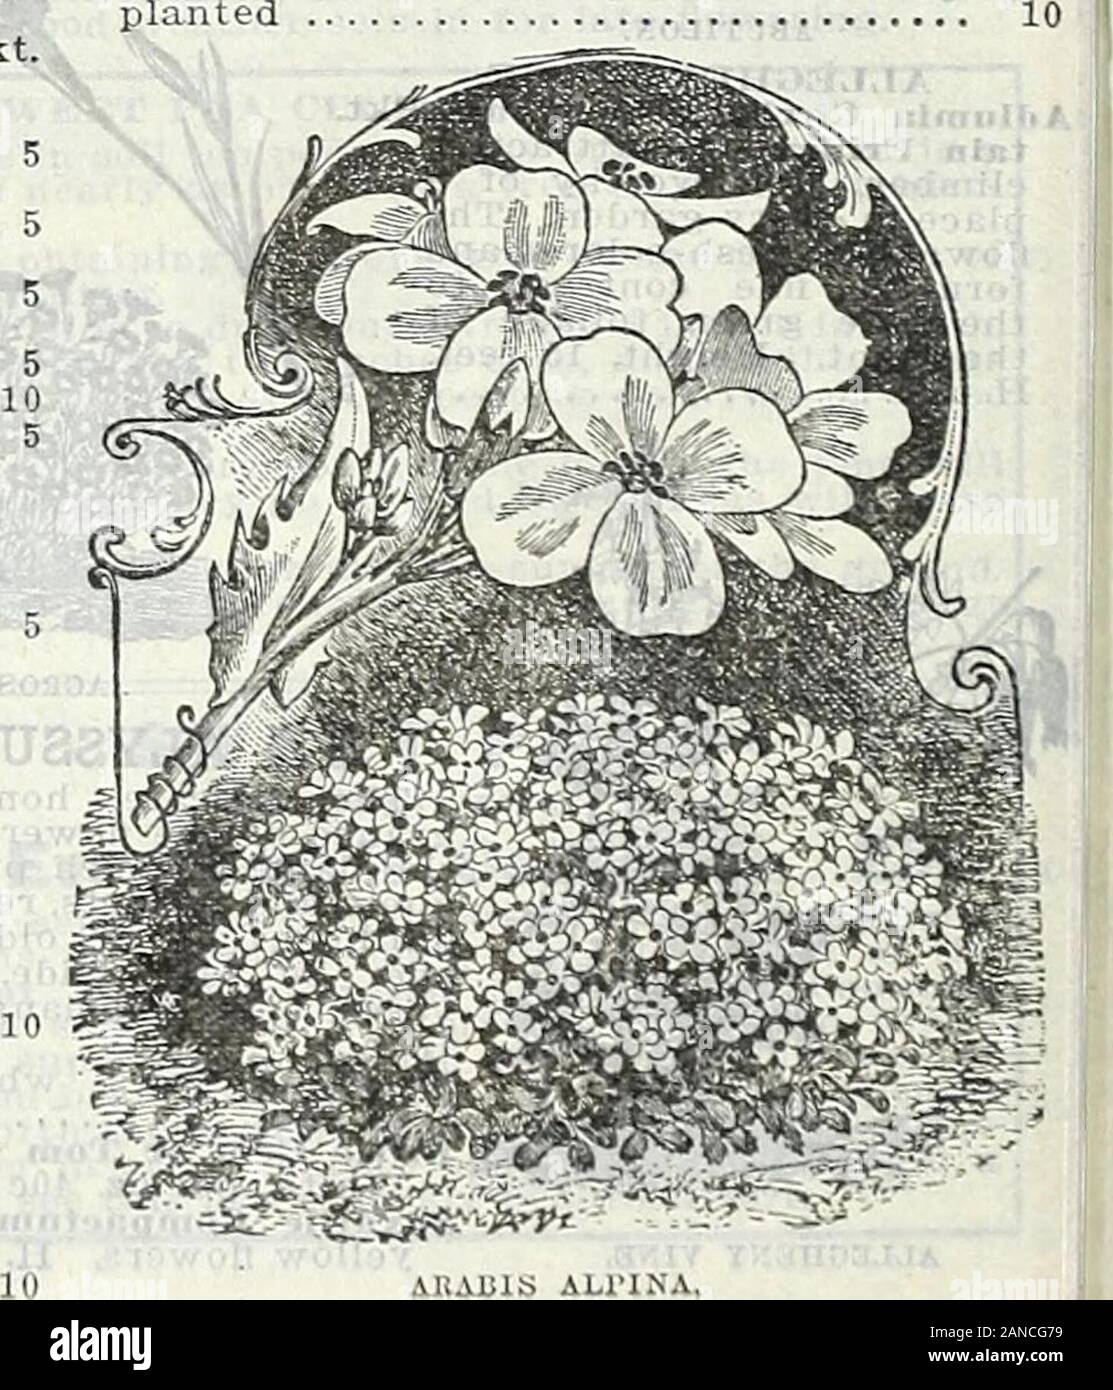 Farm and garden annual, spring 1906 . andiflora Alba—A Pkt.new variety, with very large,snow-white flowers, which areproduced in great abundance.... Chrysantha—Bright yellow, flower-ing freely all summer. 4 feet. . Coerulea—Fine porcelain blue, cen-ter petals white, 2 feet Glandulosa (True)-1—Blue and white,W2 feet Skinncrii—Scarlet and yellow, 1% ft. Choice Mixed ARABIS. Alpina—An early blooming plant,well suited for borders and rockwork. Pure white flowers; height6 inches. H. P ARCTOTIS GRANDIS.African I.ilac Daisy. A remarkably handsome annualfrom Africa, forming many branchedbushes, 2 to 3 Stock Photo